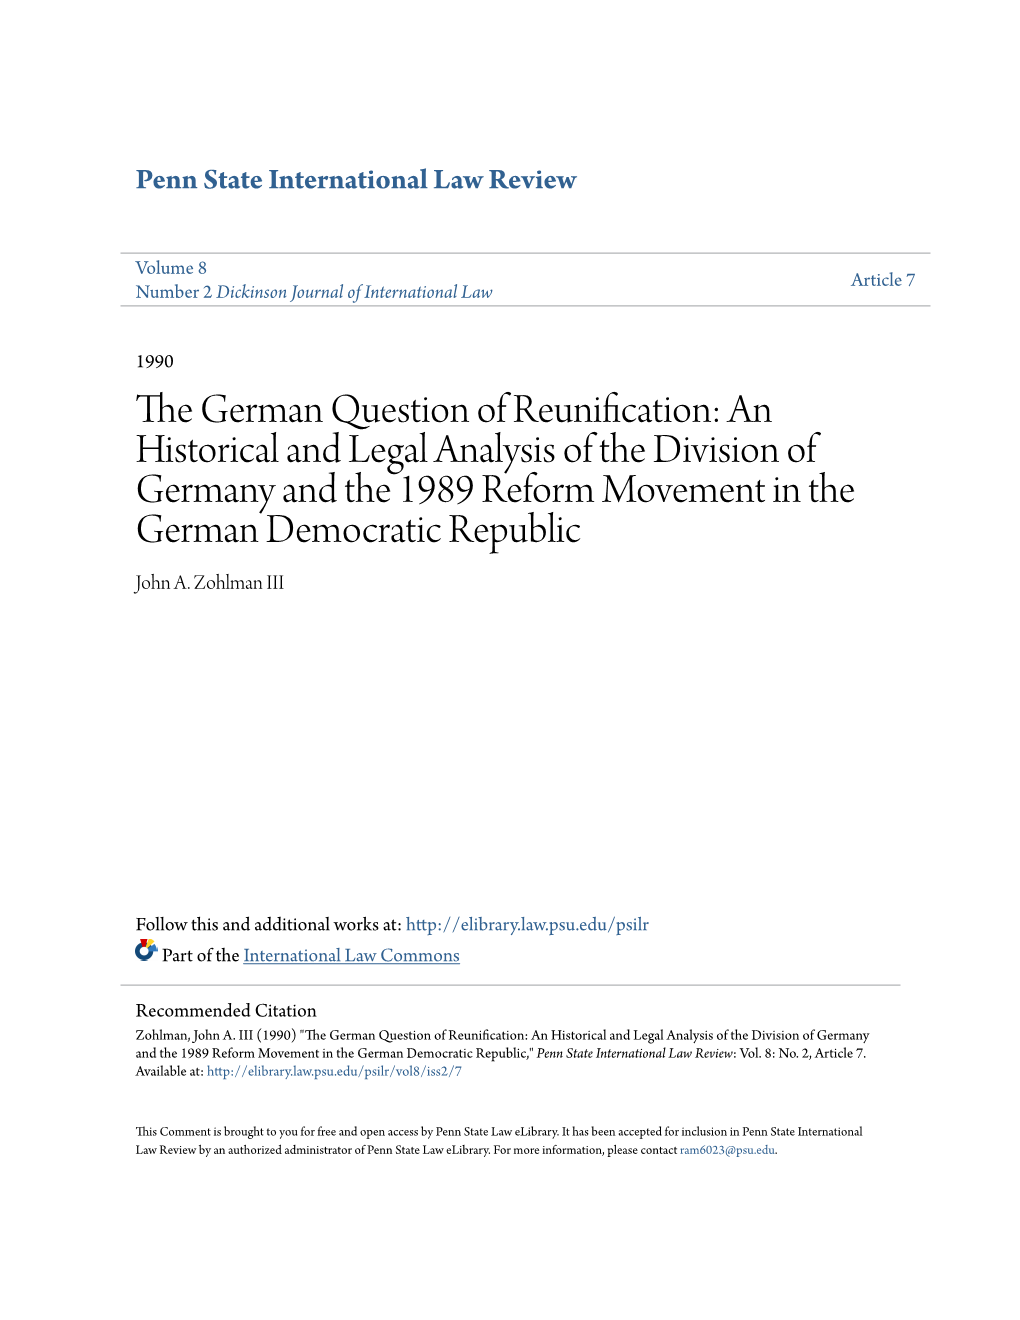 The German Question of Reunification